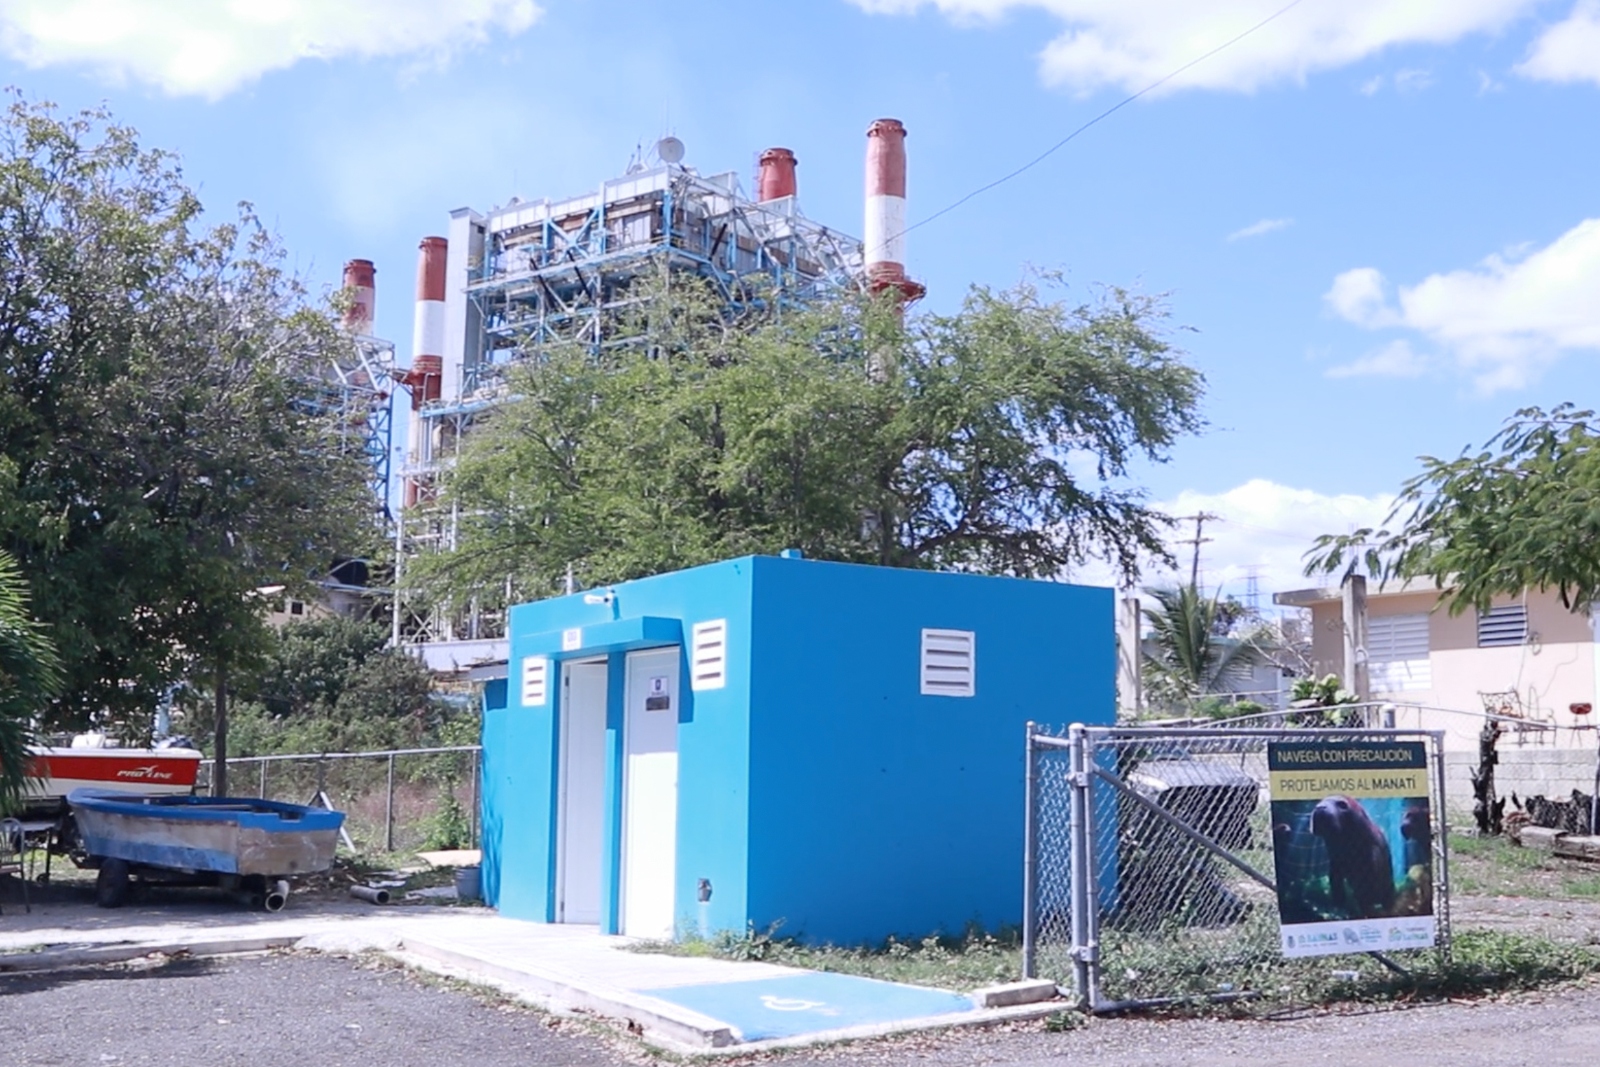 A small blue building sits in front of a large industrial complex with cooling towers.